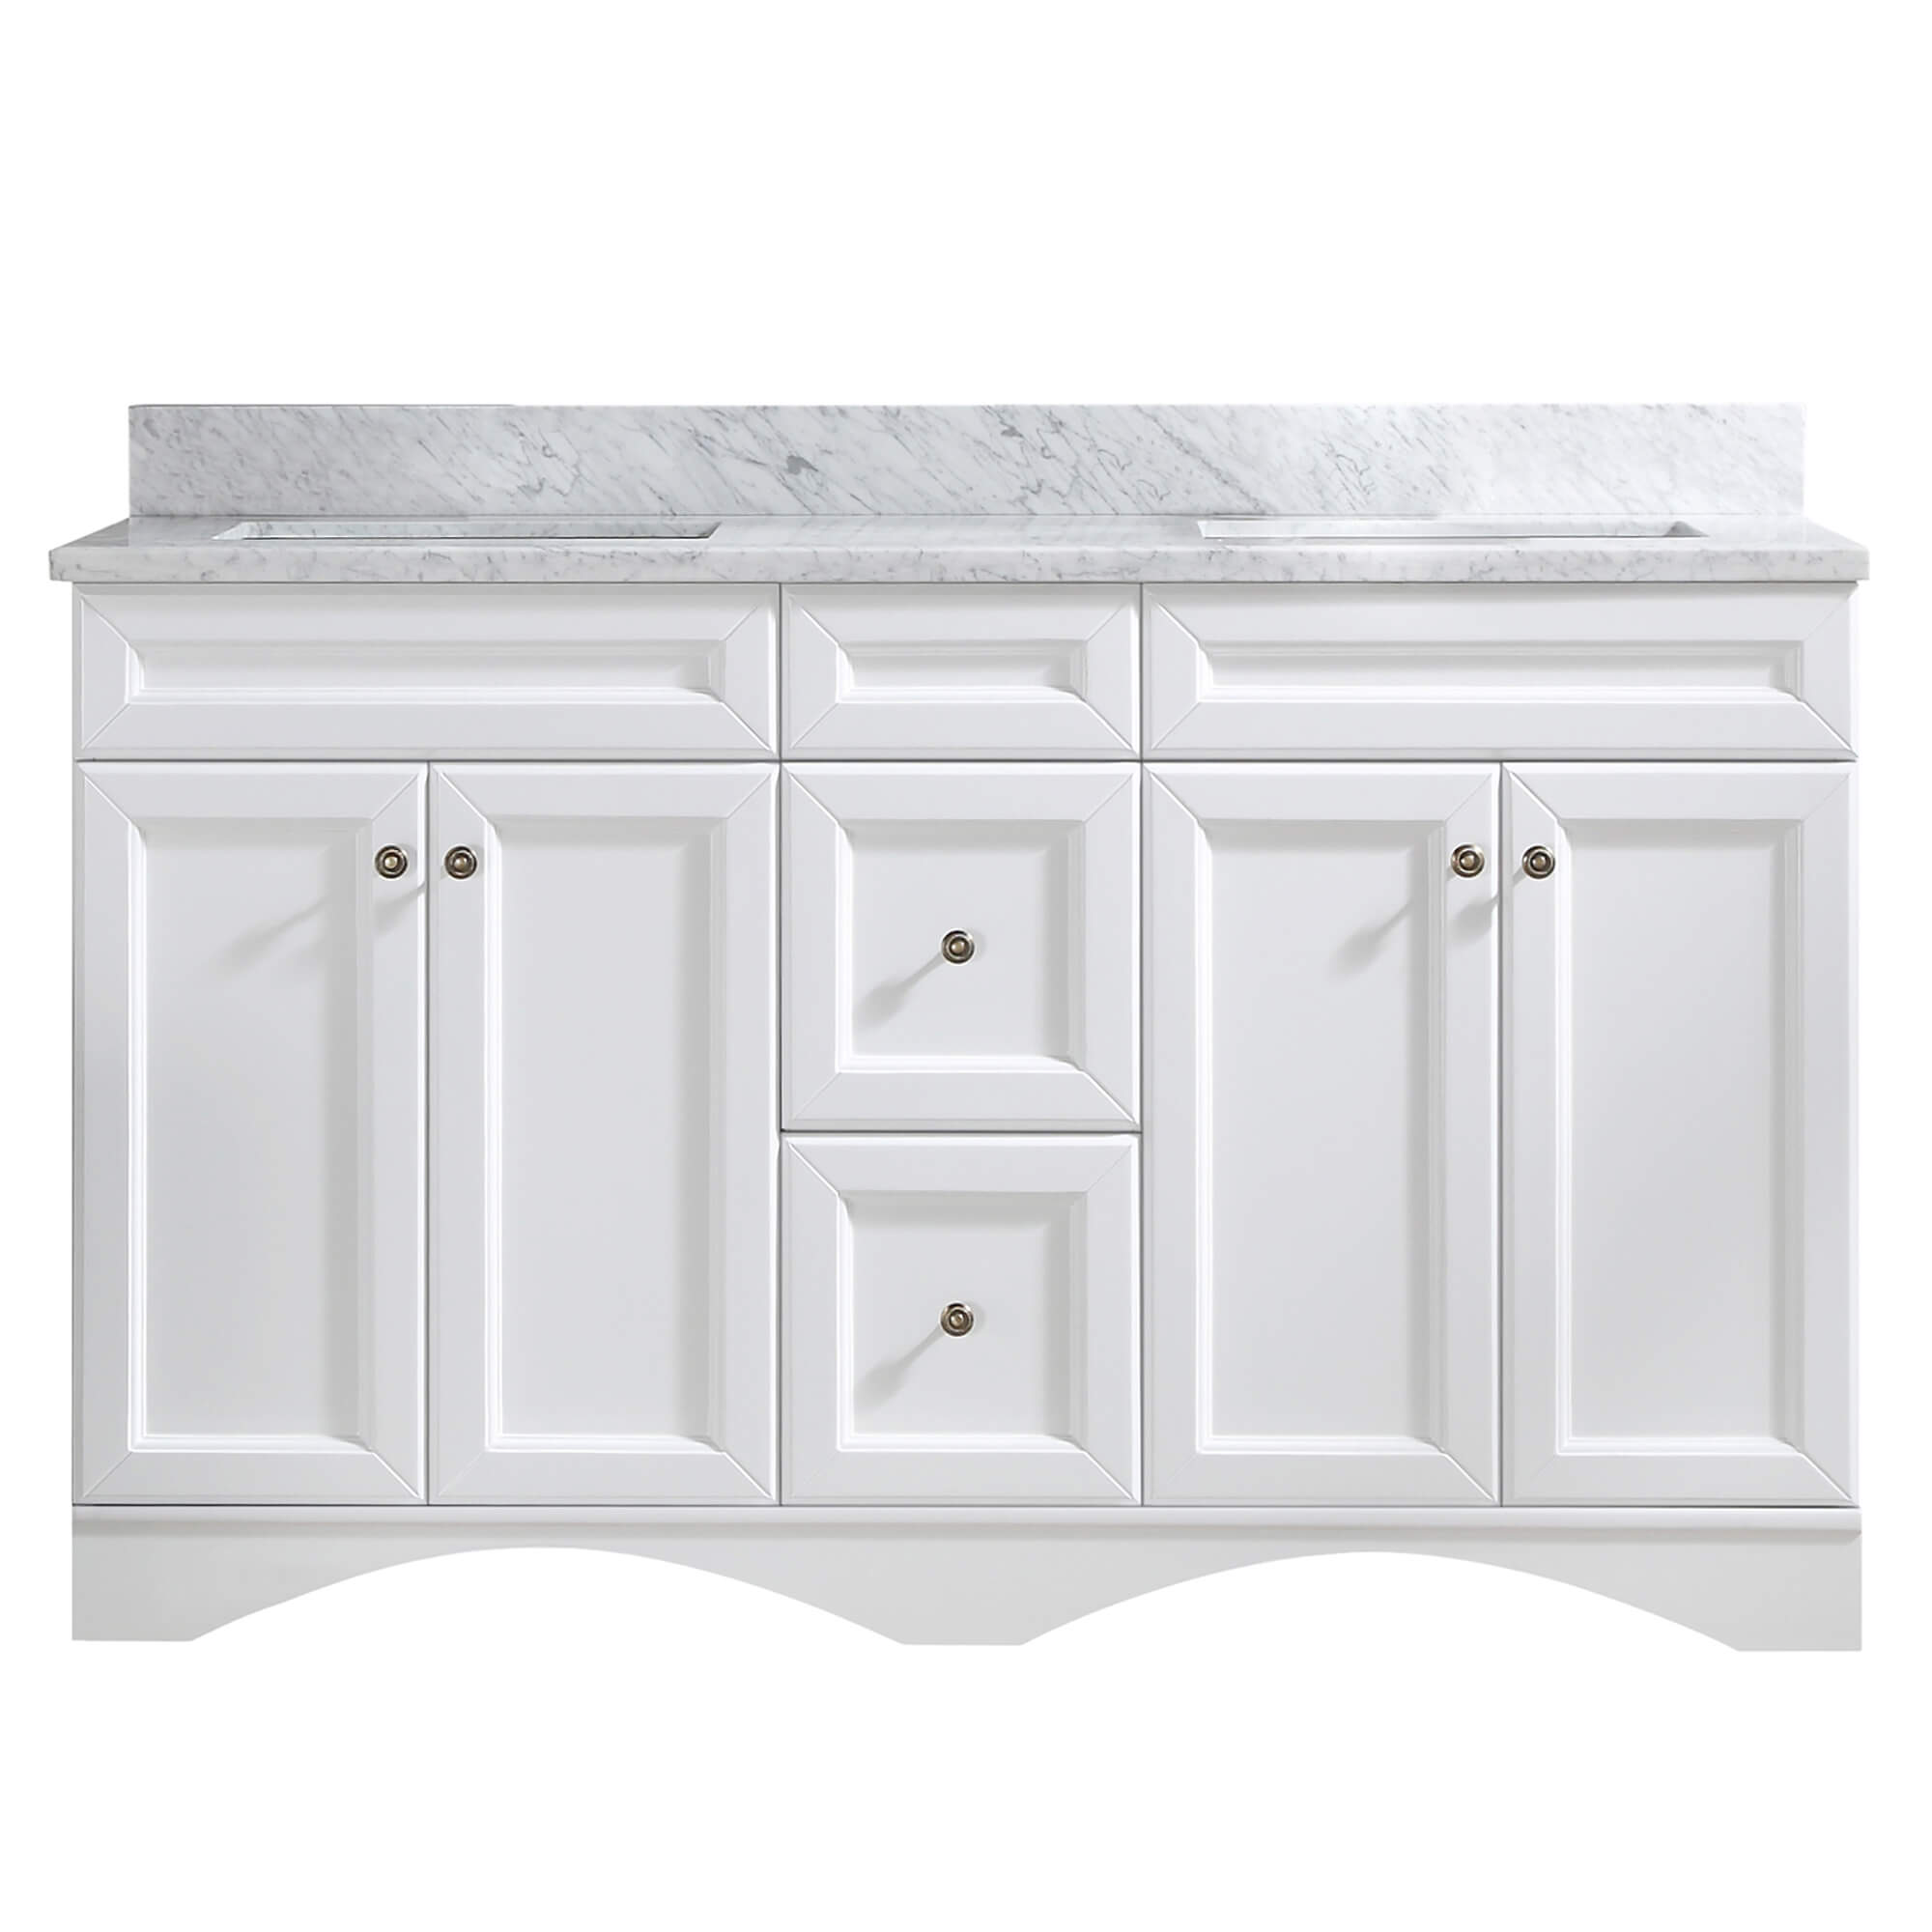 CASAINC 60 x 22 x 35.4 in. Solid Wood Bath Vanity with Marble Top and Backsplash in Gray/White (No/With Mirror)